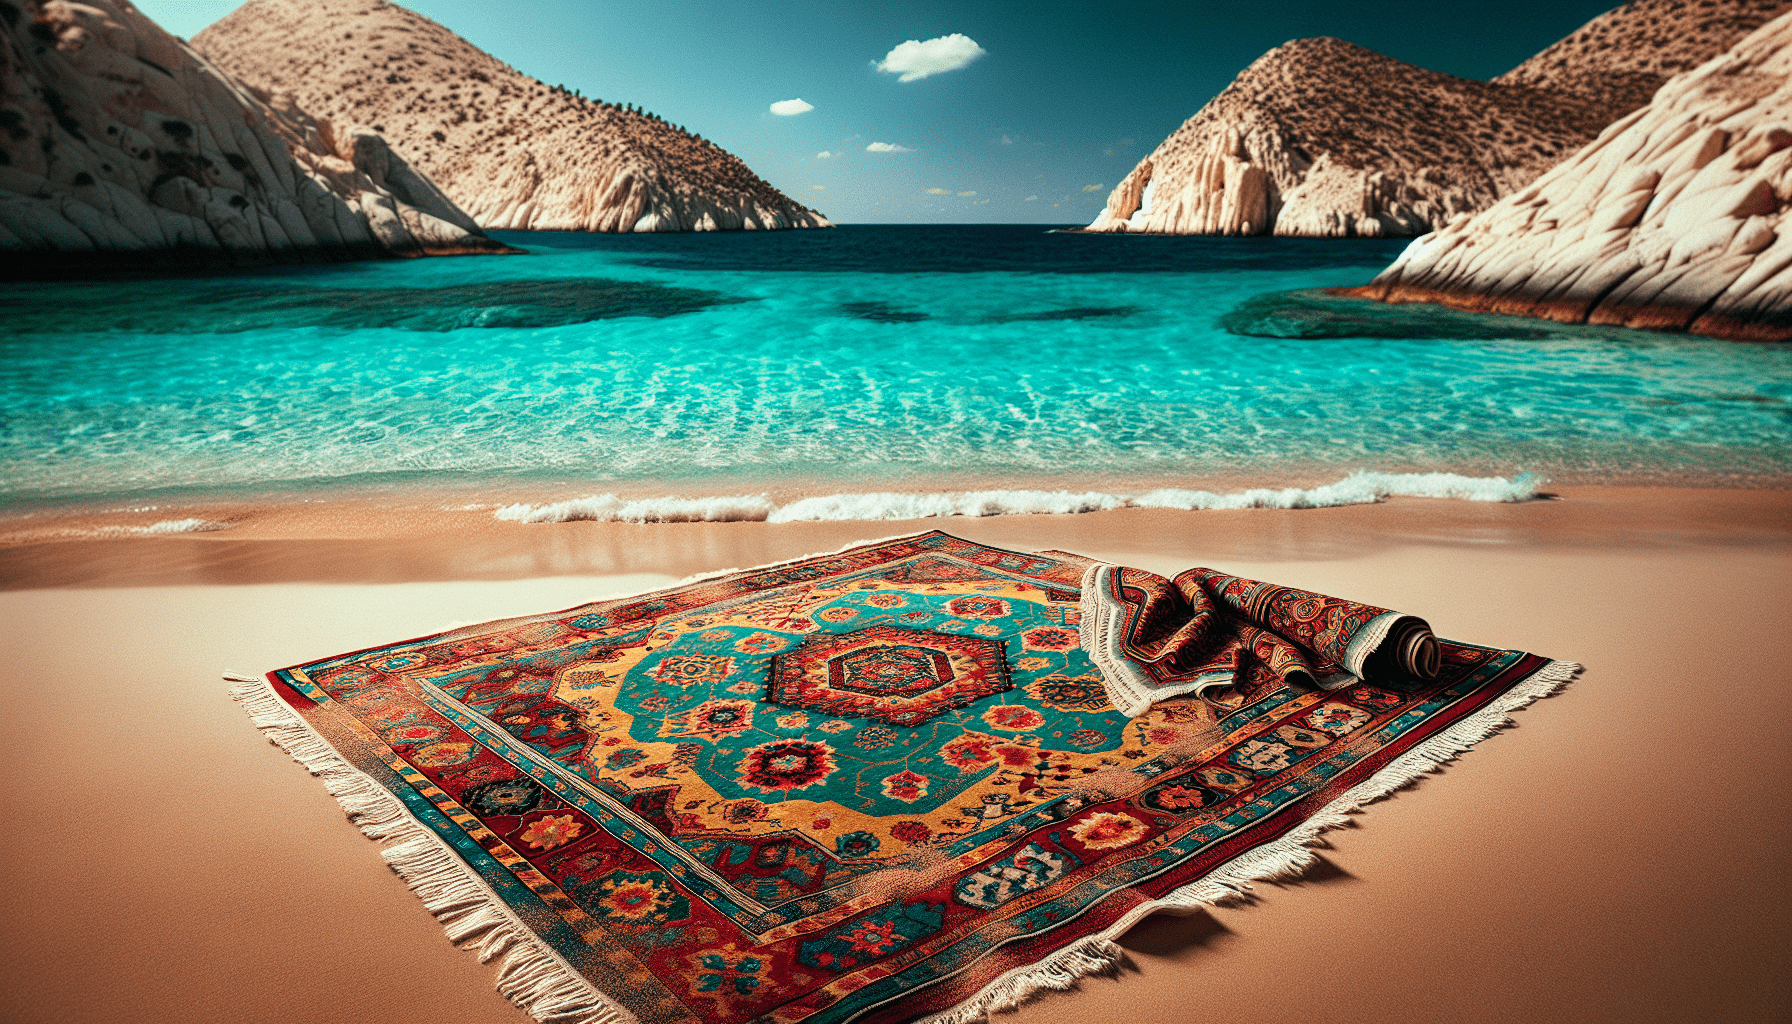 A colorful patterned rug from Turkey is laid out on a sandy beach with a view of azure waters and rocky hills in the background.